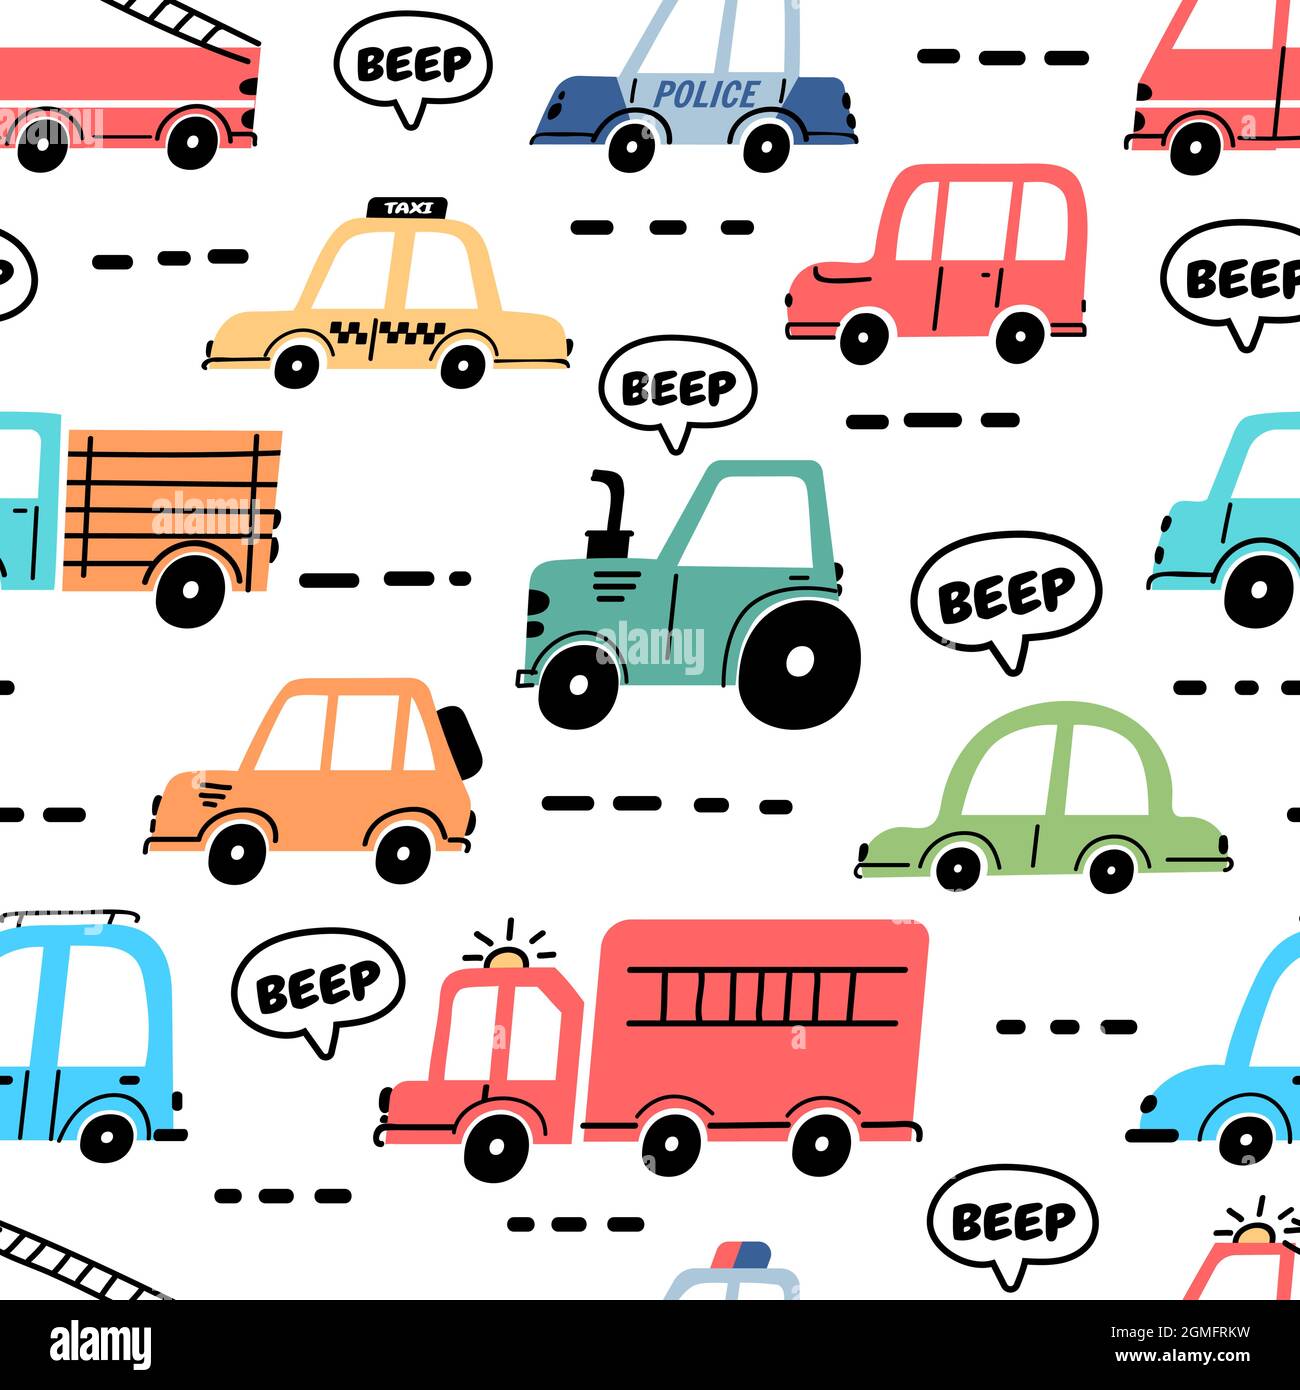 Cartoon Cars Seamless Pattern With Truck Police And Fire Engine